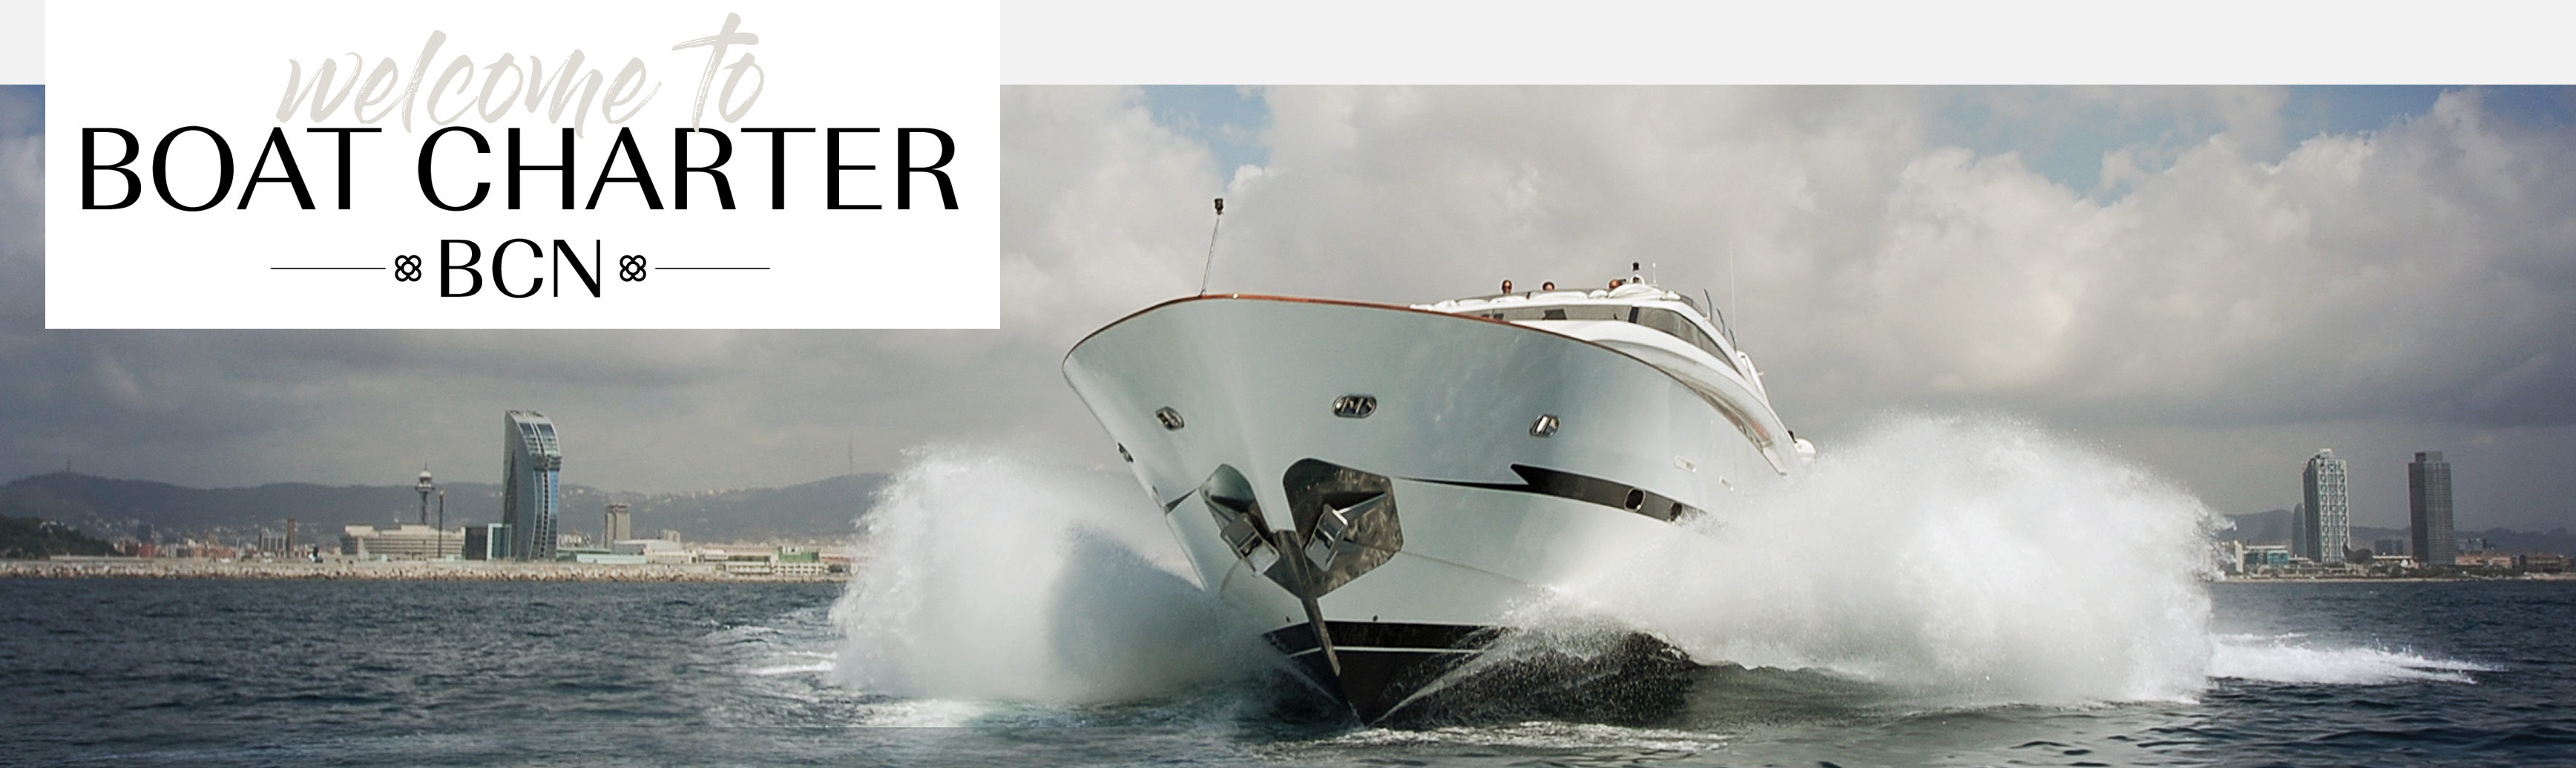 Welcome to Boat Charter BCN